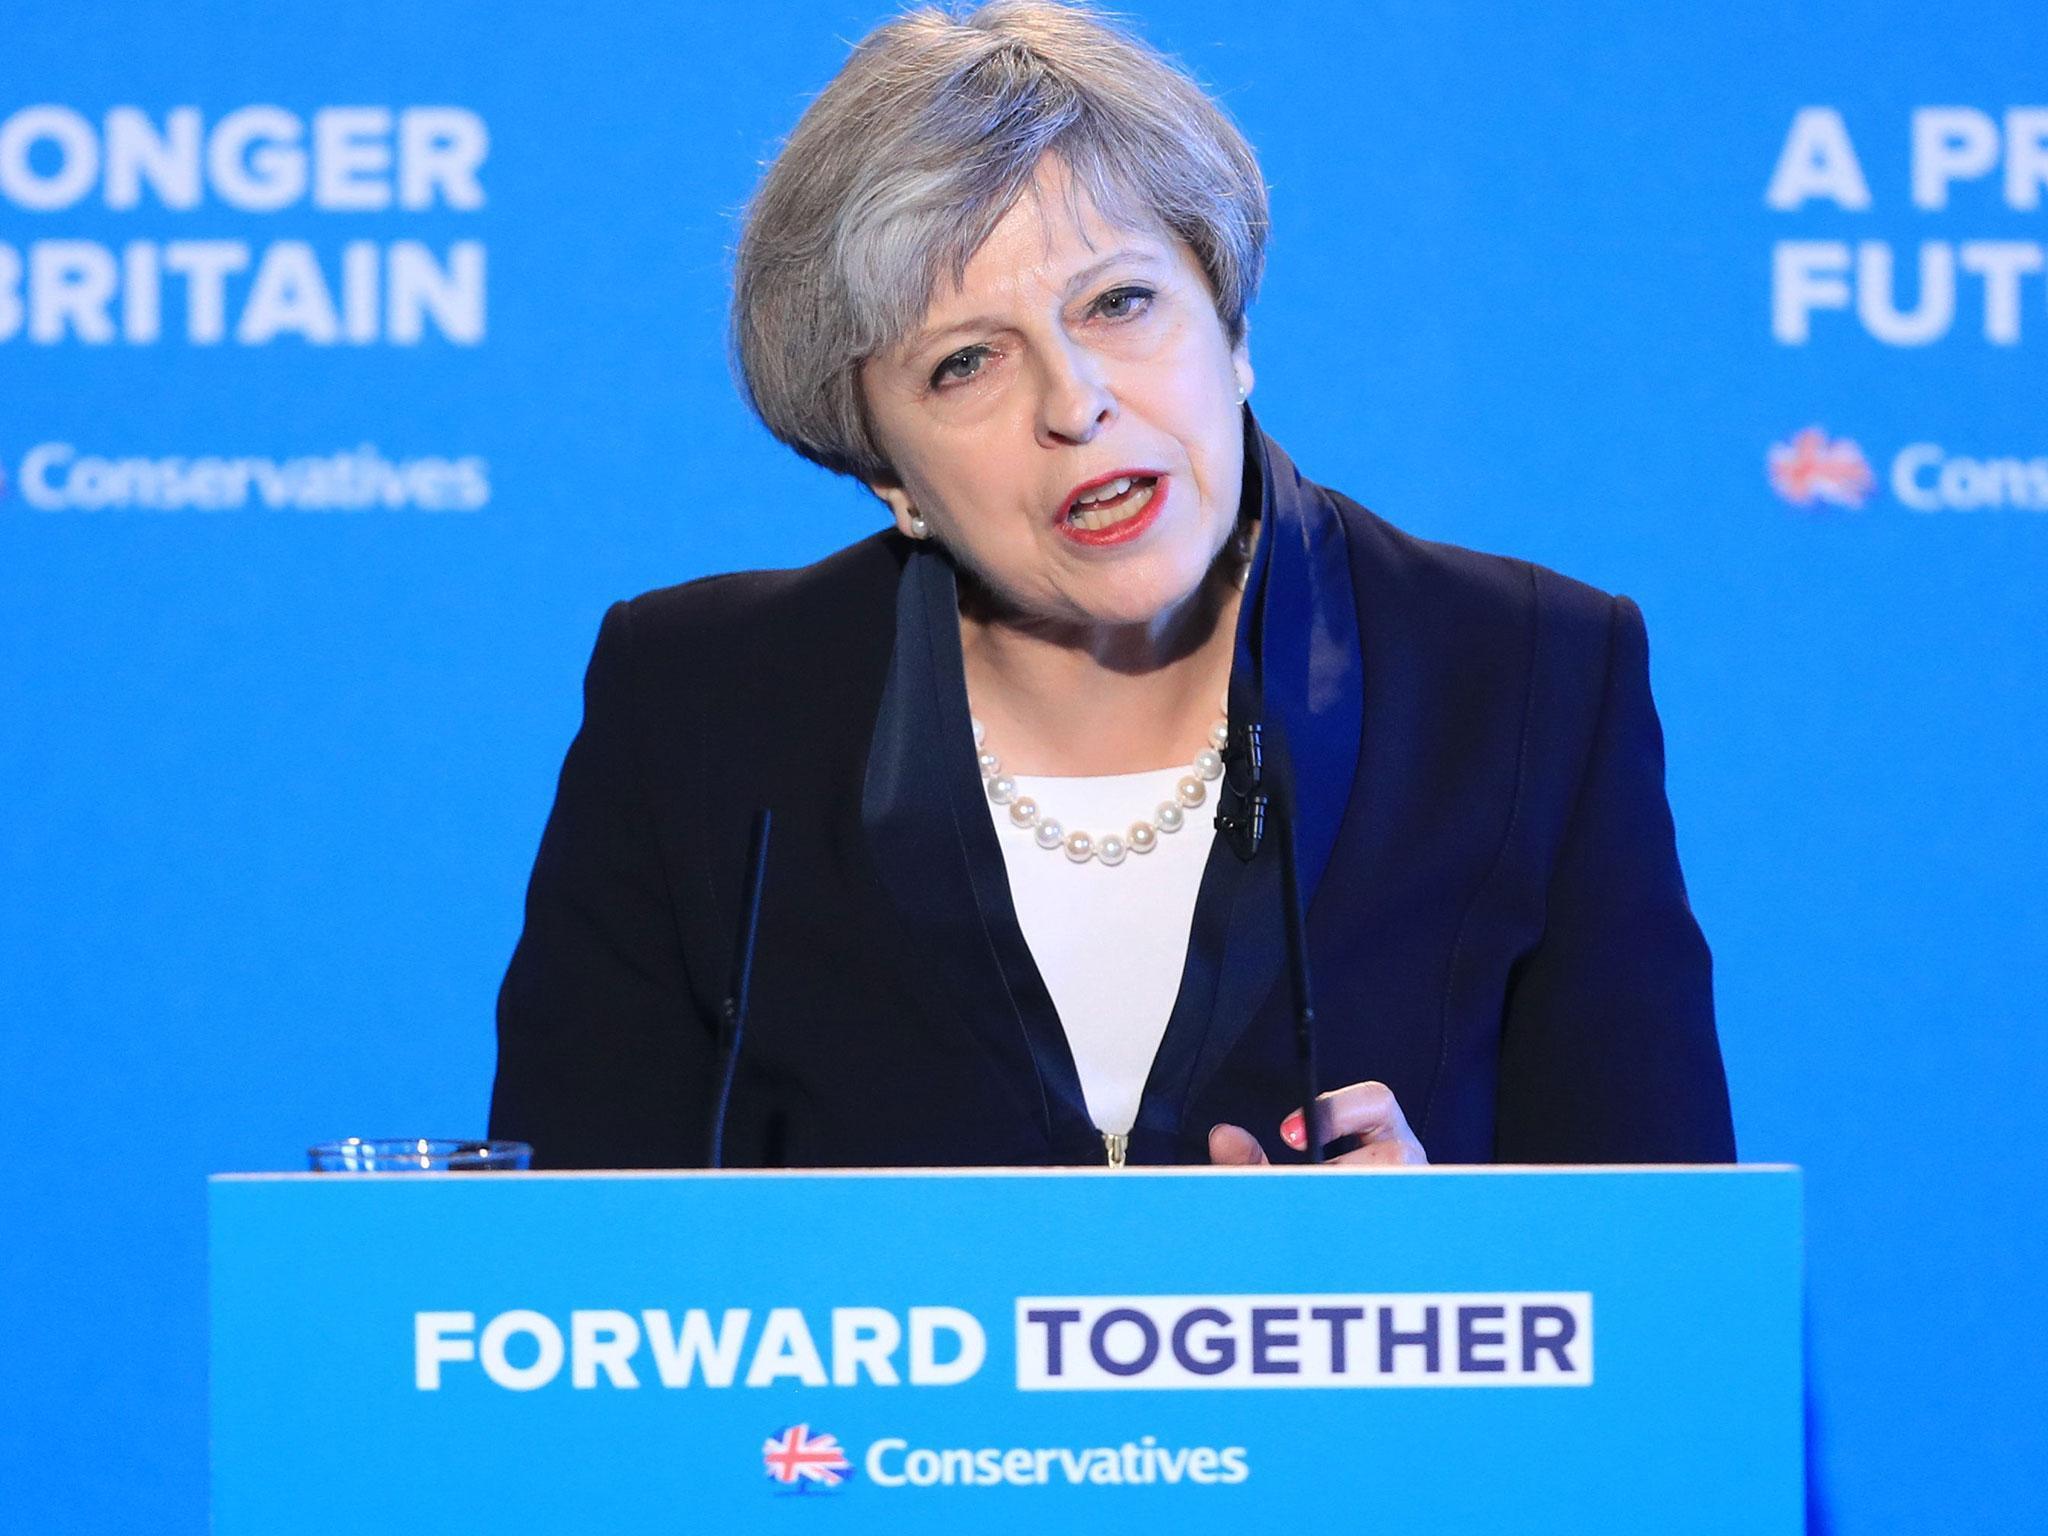 Conservative party leader Theresa May during the Conservative Party manifesto launch in West Yorkshire